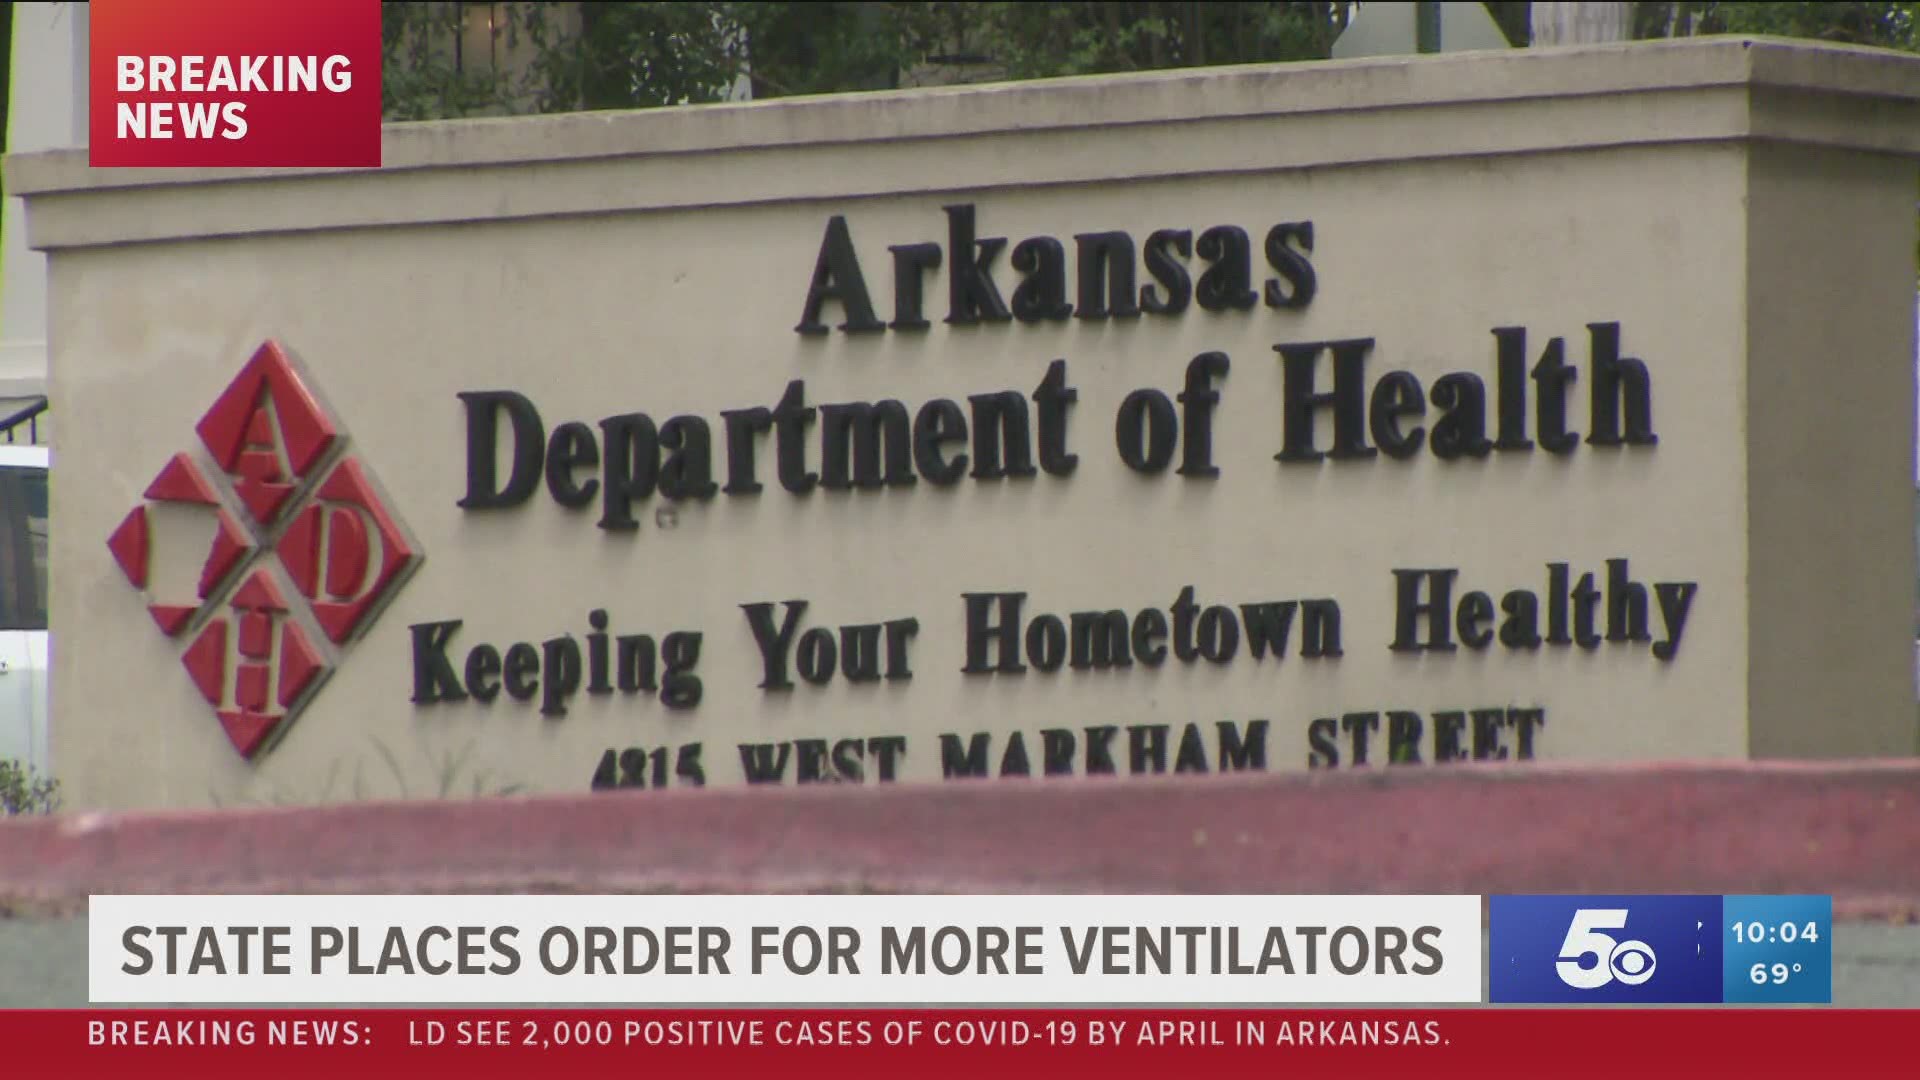 State places order for more ventilators